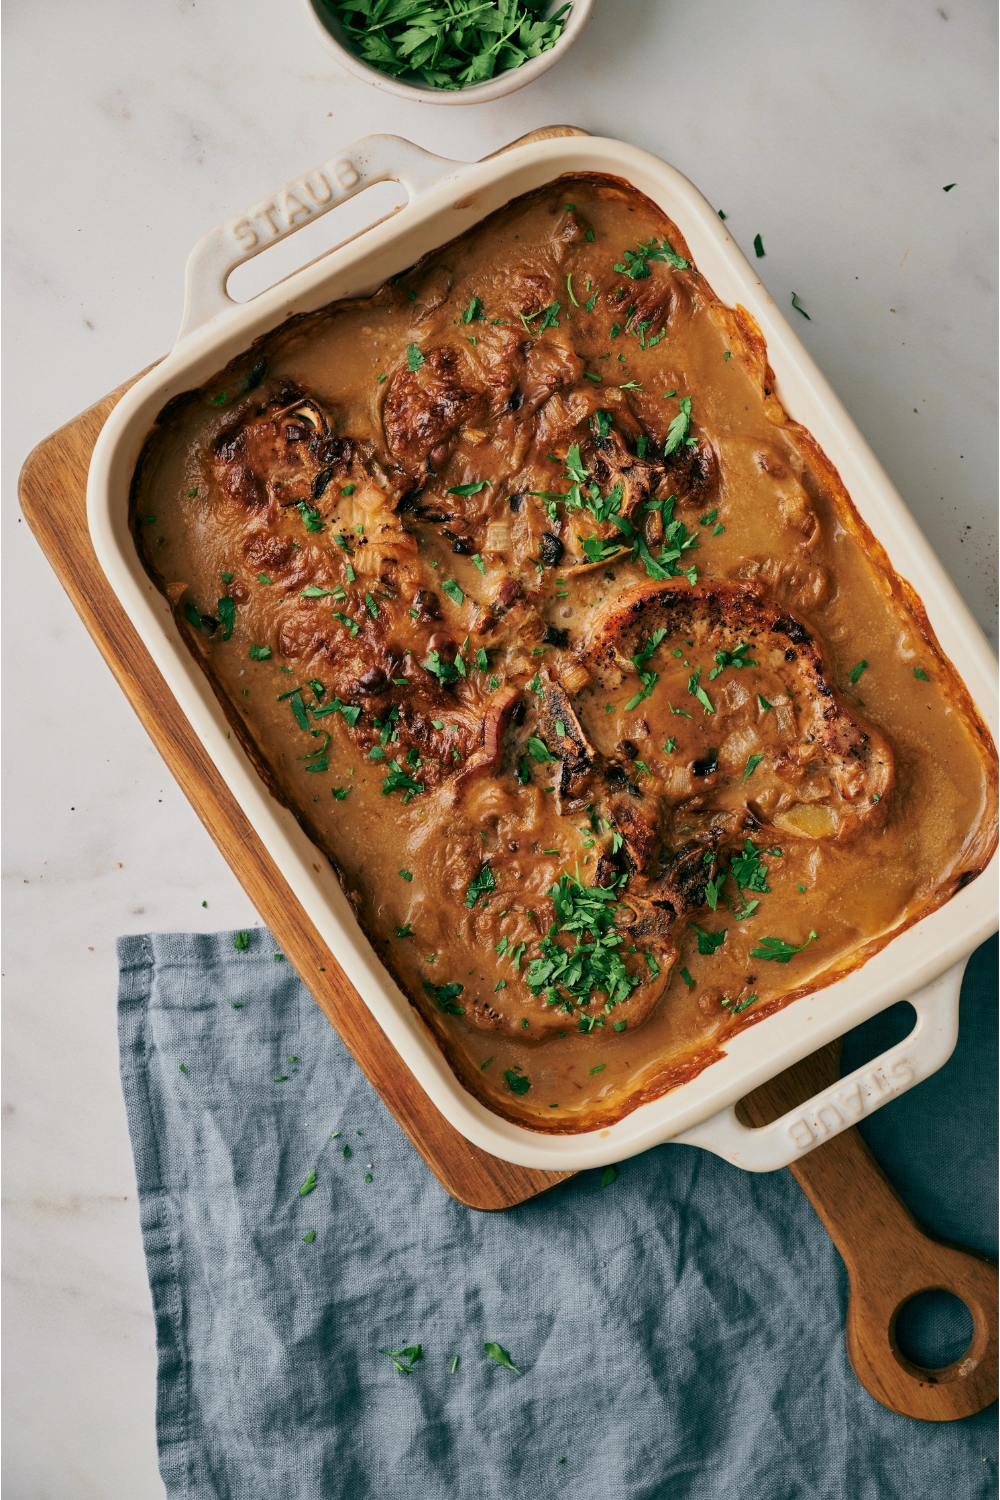 A white baking dish filled with browned pork chops smothered in a creamy sauce and garnished with fresh parsley.